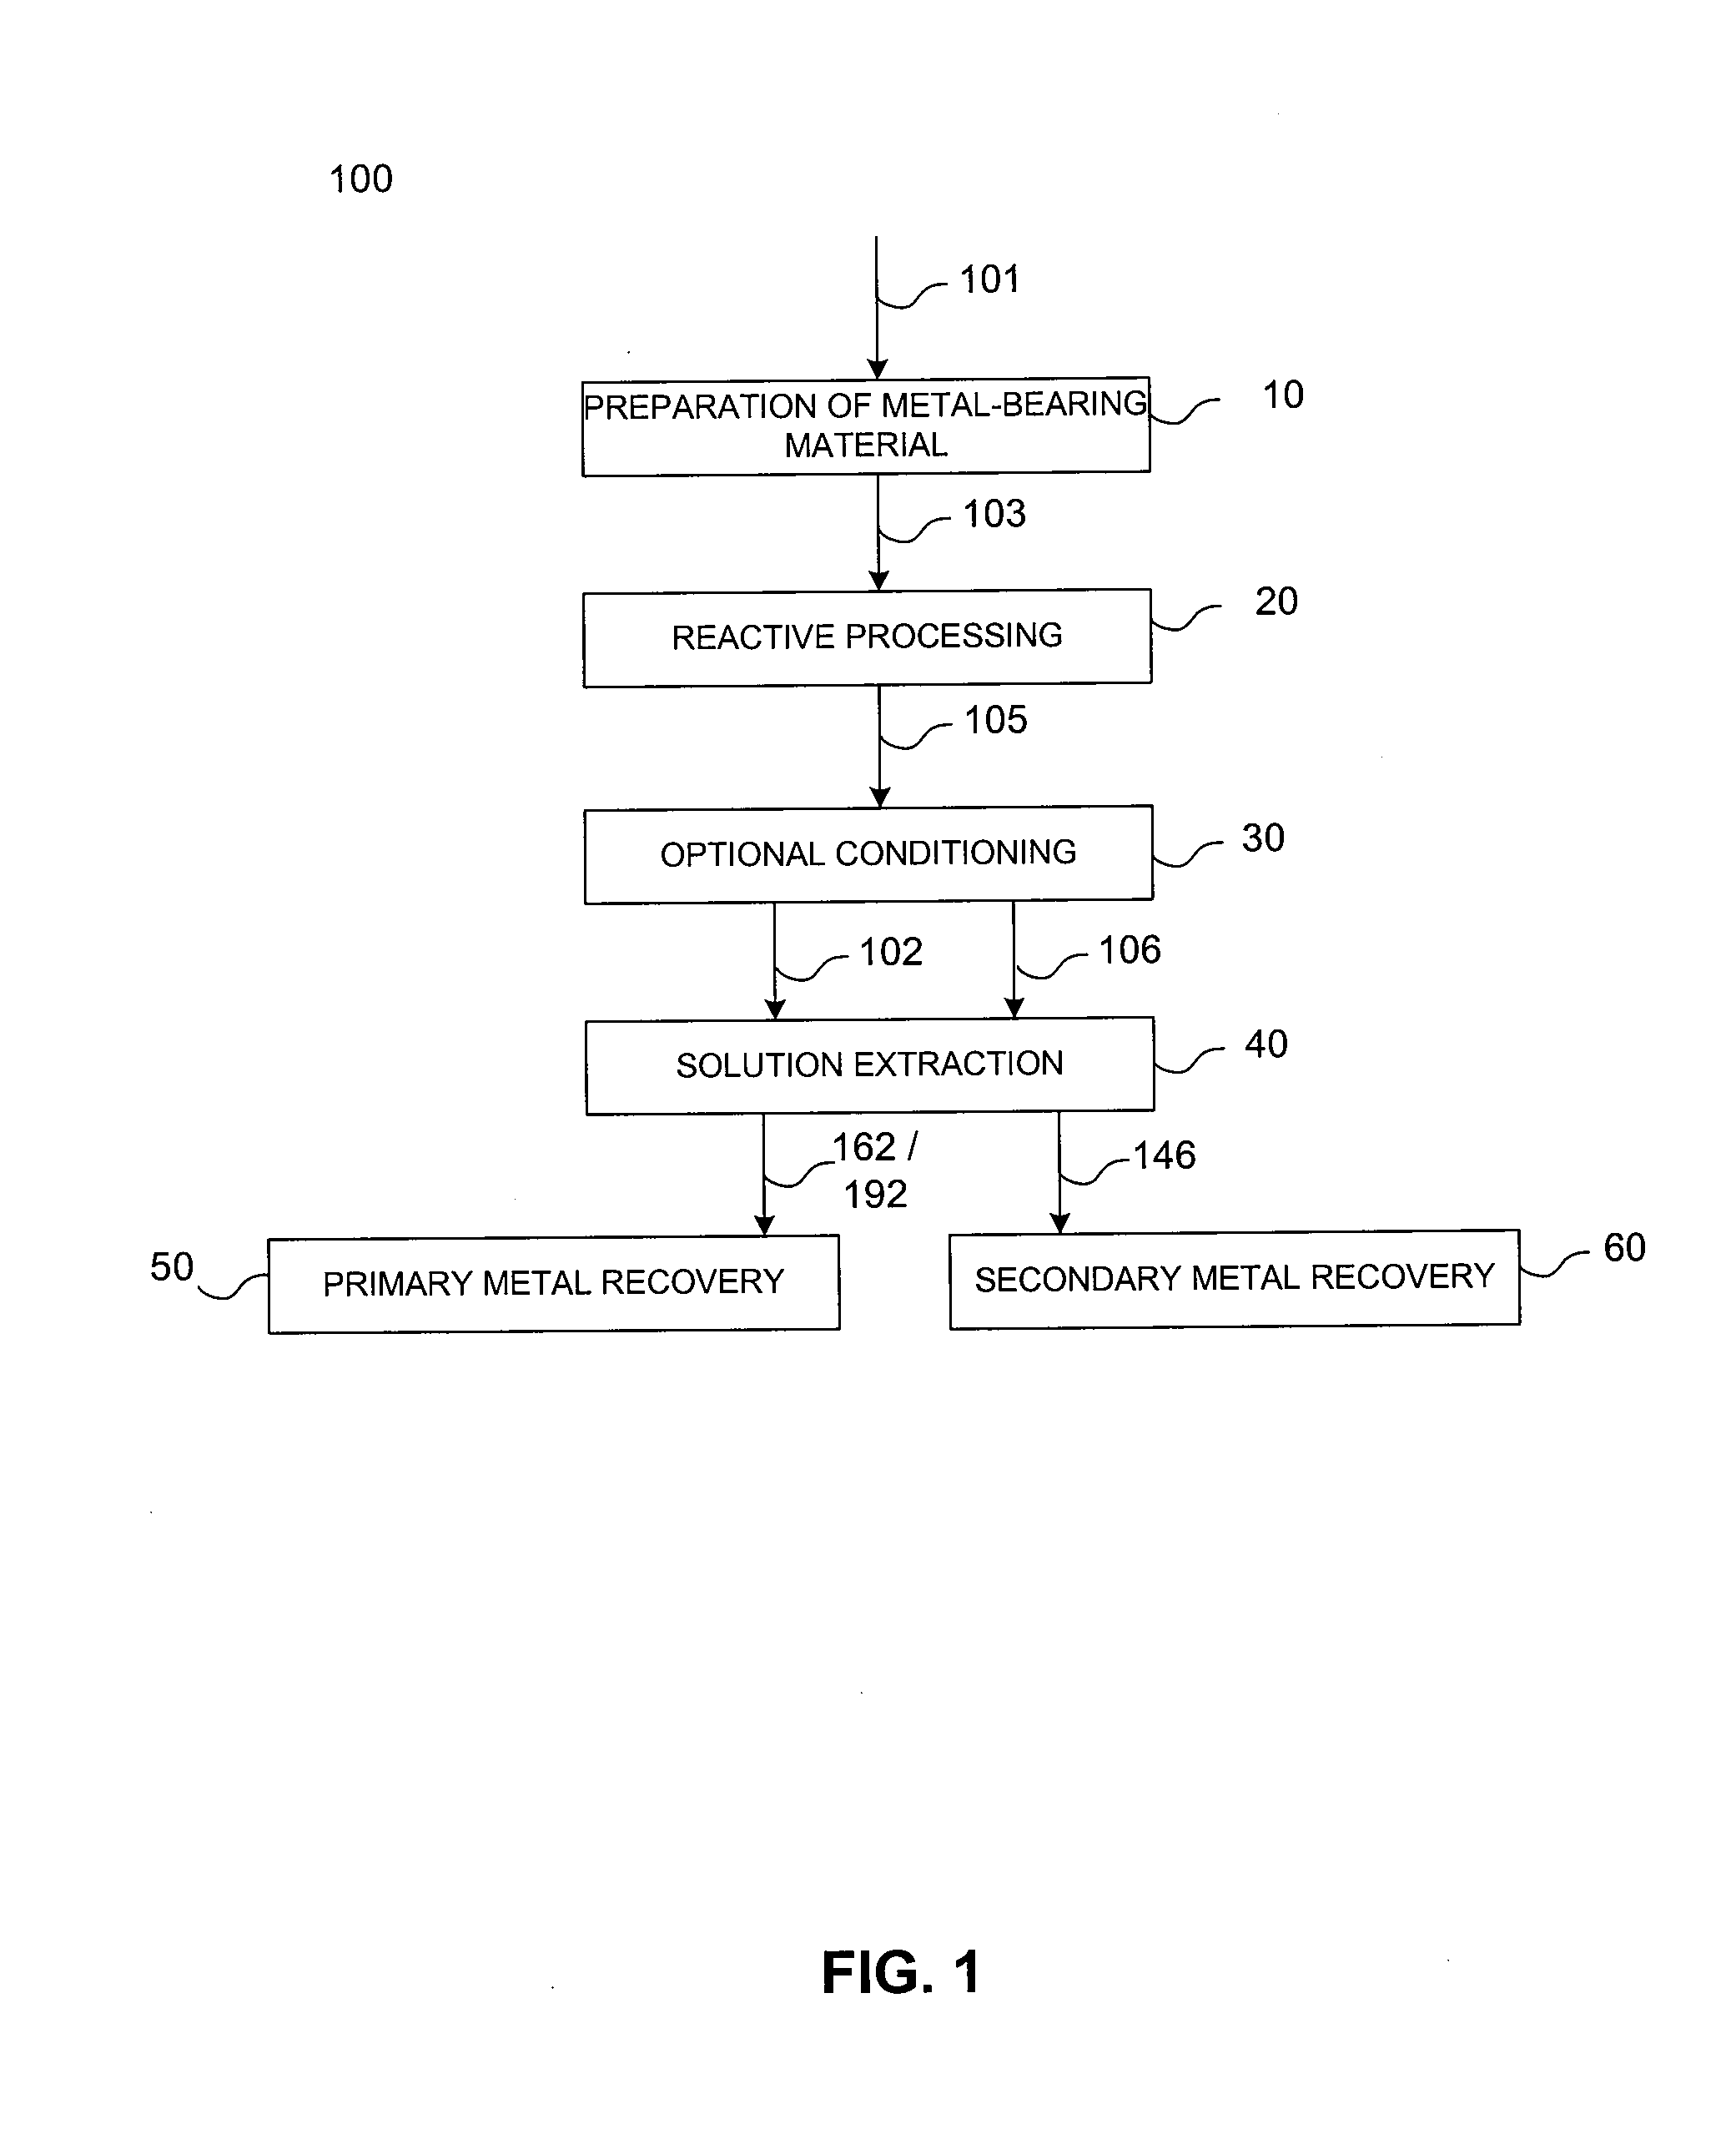 System and method including multi-circuit solution extraction for recovery of metal values from metal-bearing materials